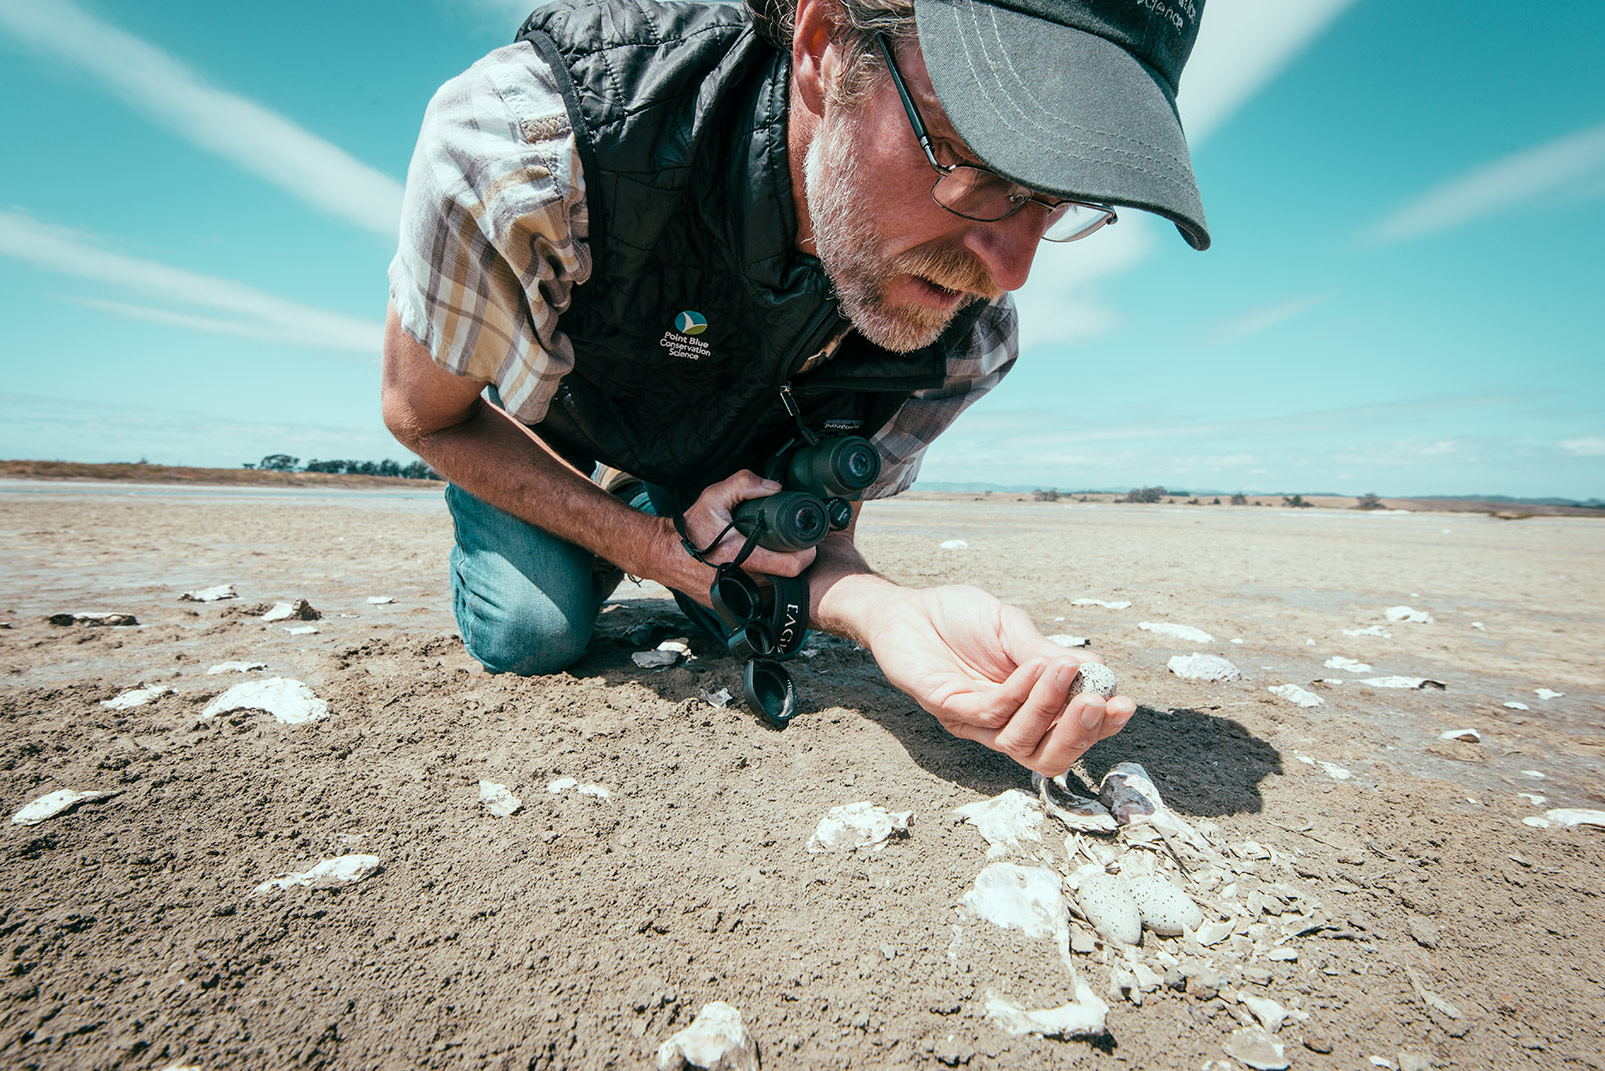 Biologist Carleton Eyster studies a near-threatened snowy plover egg and nest site on the lower Elkhorn Slough. Snowy plovers are especially vulnerable to human activities because they breed and build their nests on the ground. Eyster works at the nonprofit Point Blue Conservation Science to help plovers and other wildlife in similarly vulnerable situations. Photo © Kiliii Yuyan